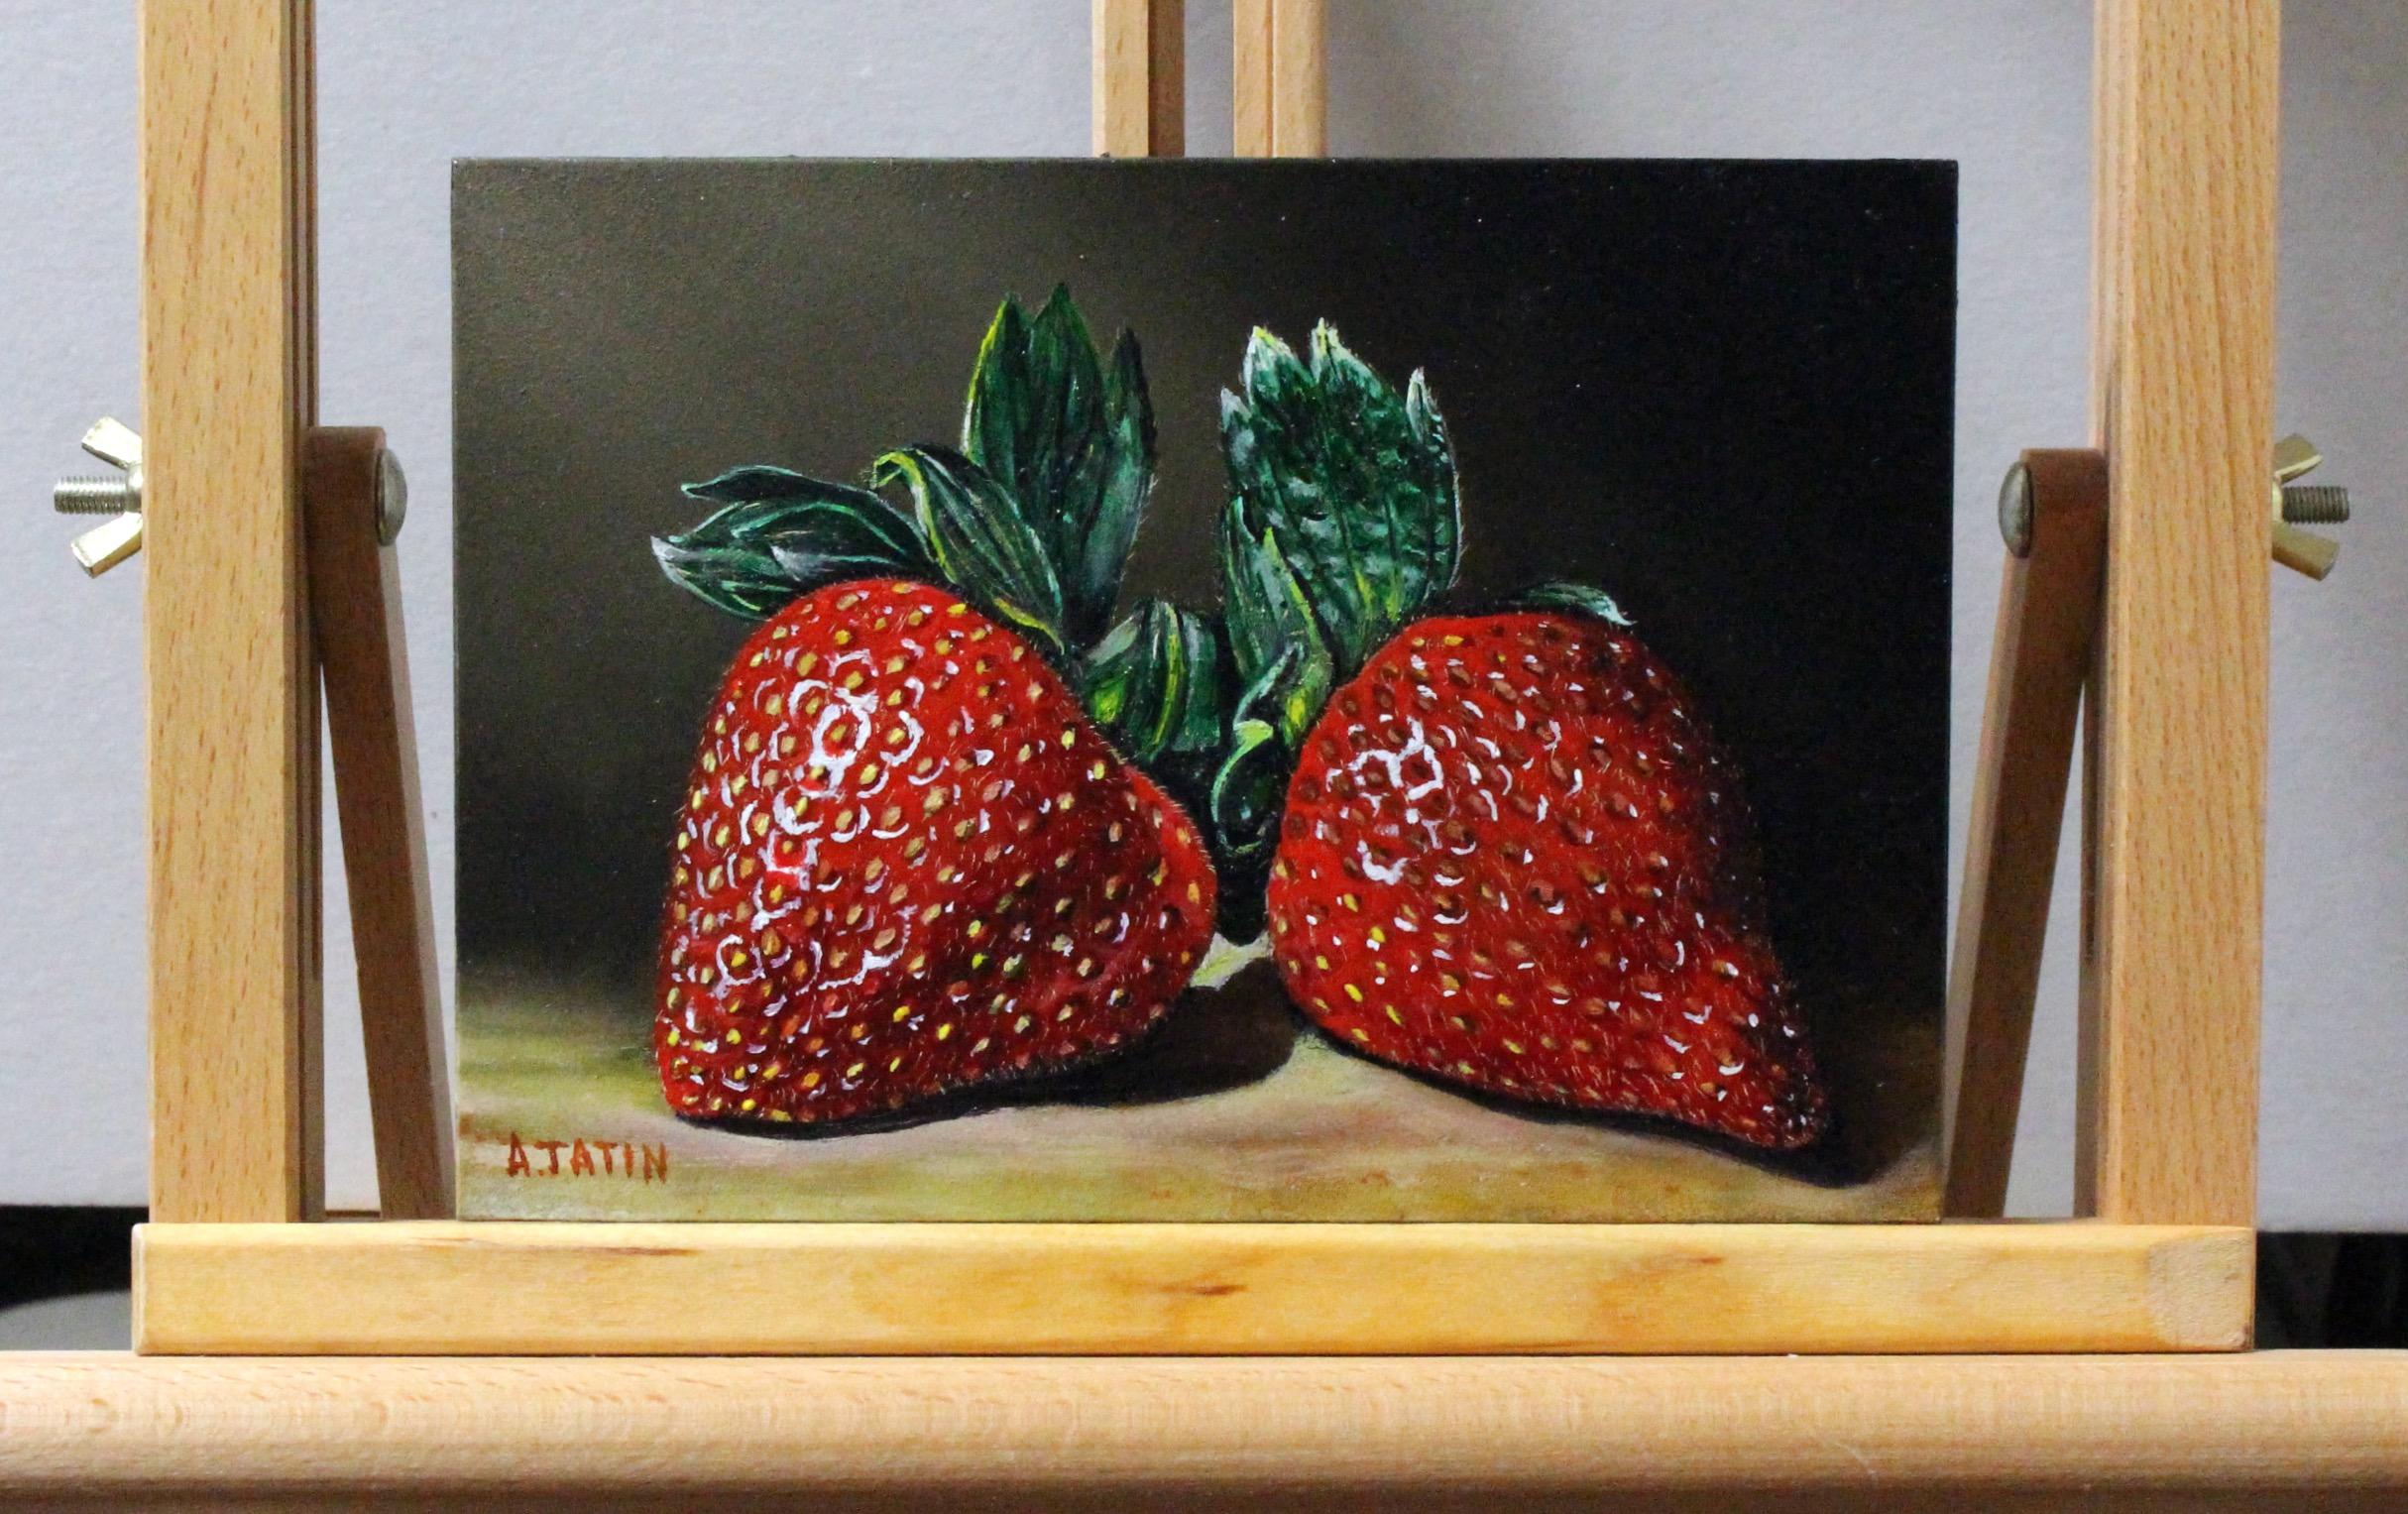 <p>Artist Comments<br>Two plump strawberries command attention with their vibrant red hues and lush green crowns. The light reveals their glossy surface, while the shadow adds depth and dimension to their form. Painted with Flemish techniques, the